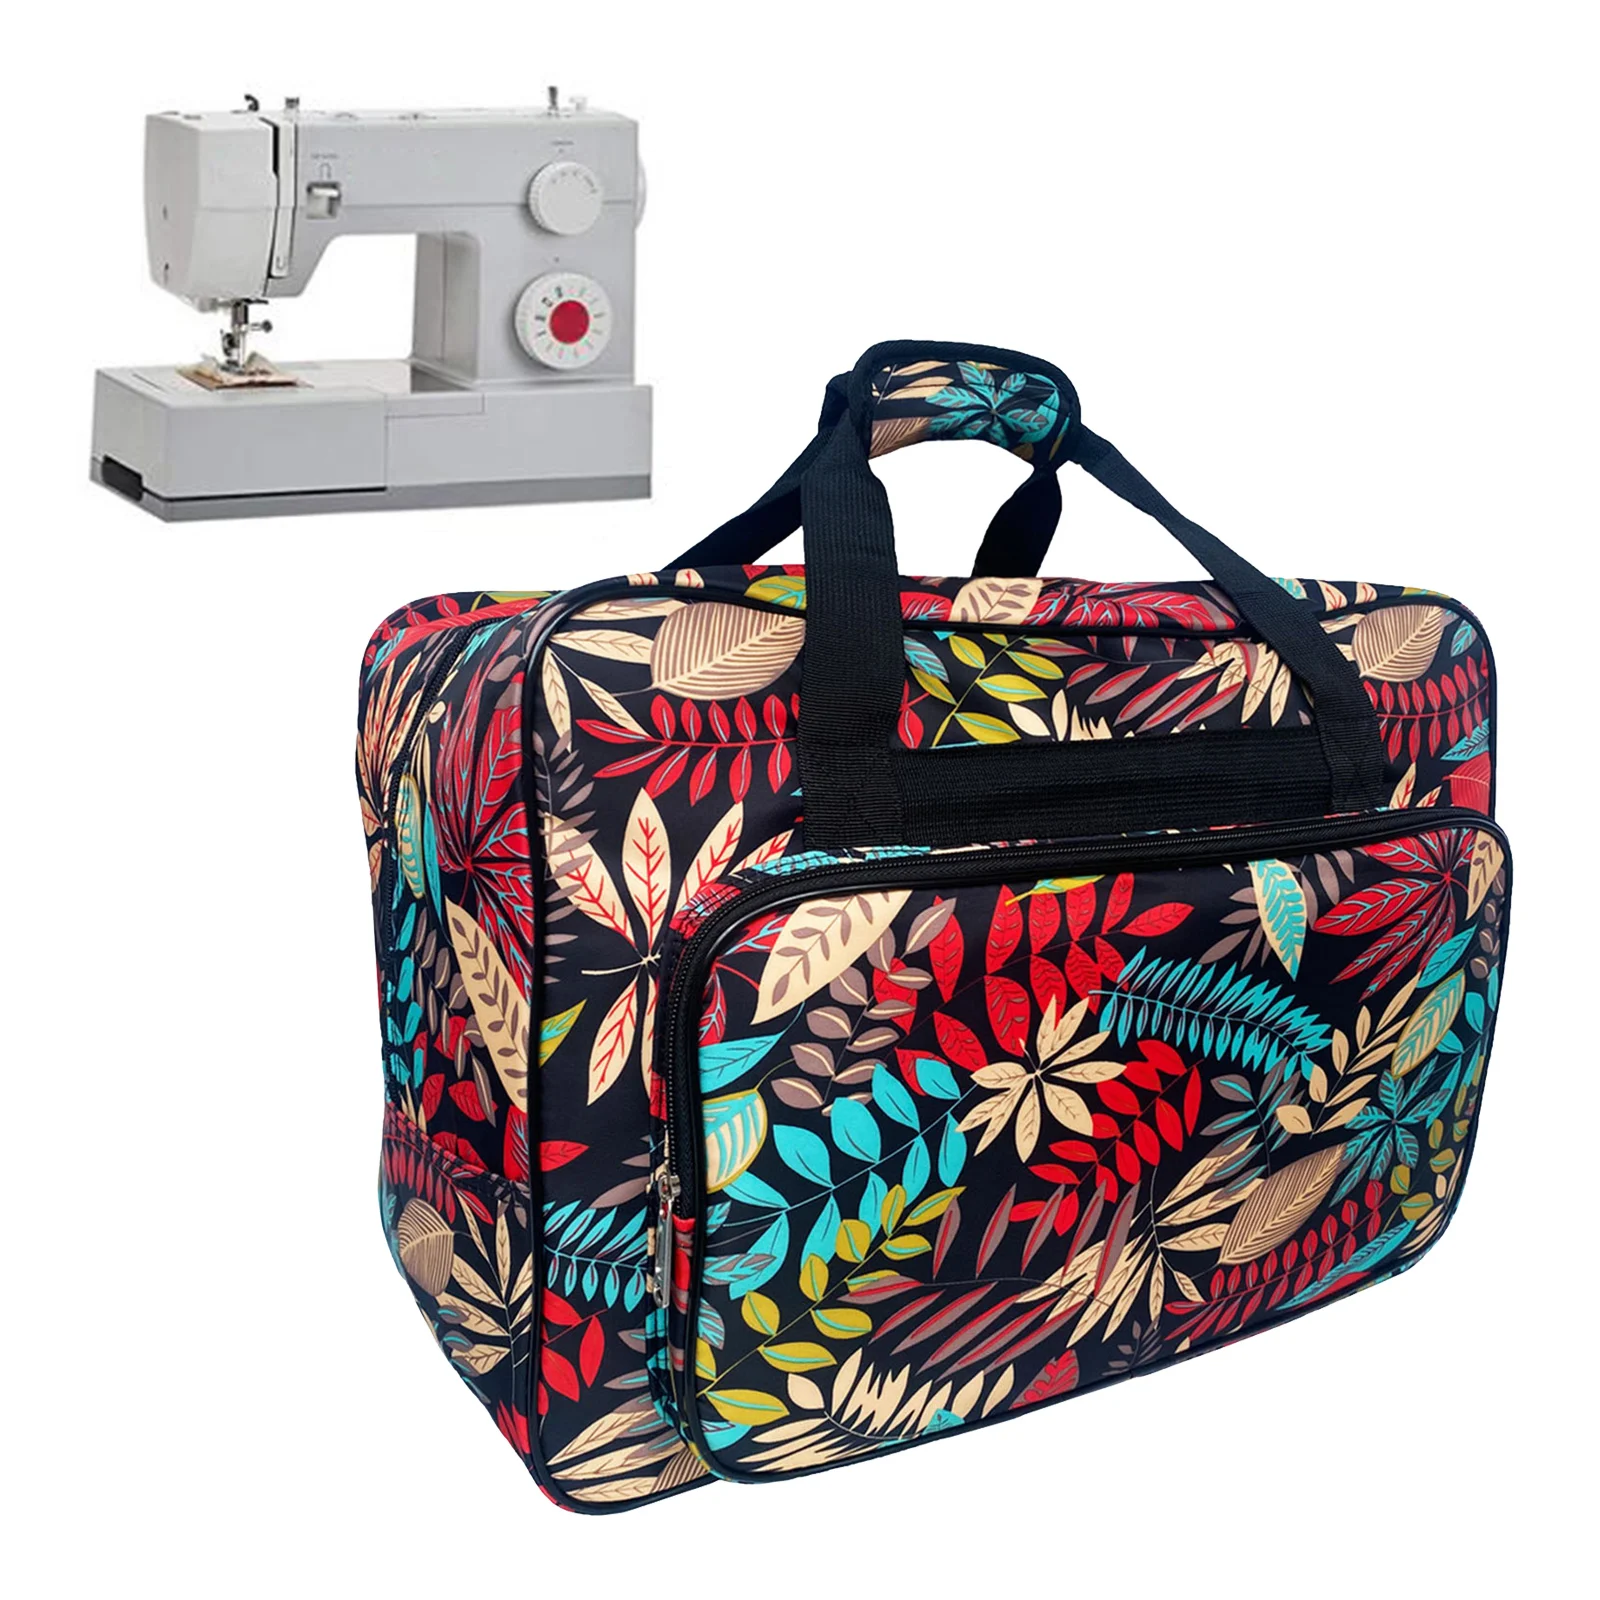 Durable Nylon Sewing Machine Carry Bag Lightweight Handbag Sewer Travel Sew Machine Tote Universal Tools Pouch Carrier